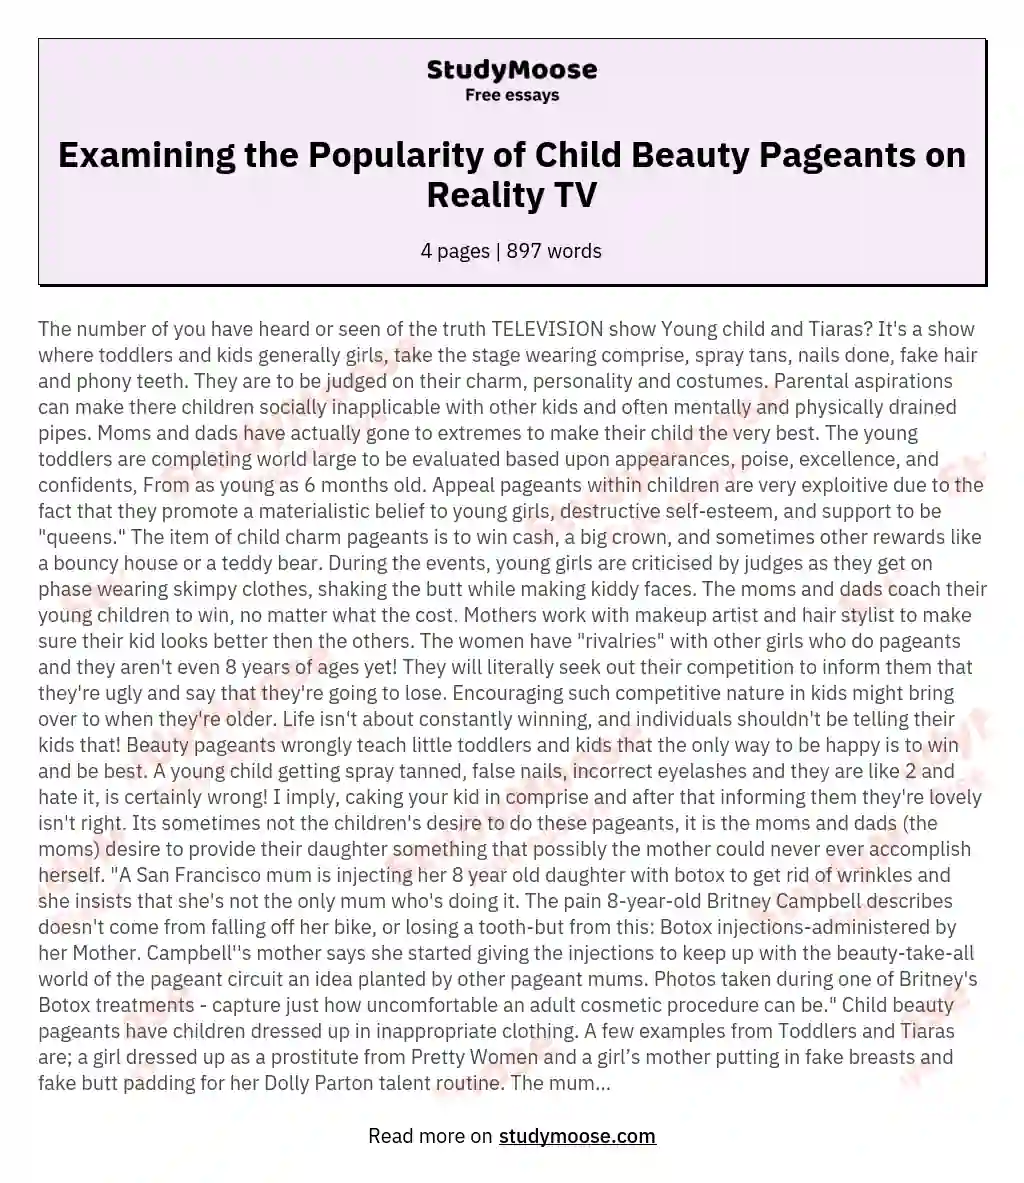 Examining the Popularity of Child Beauty Pageants on Reality TV essay